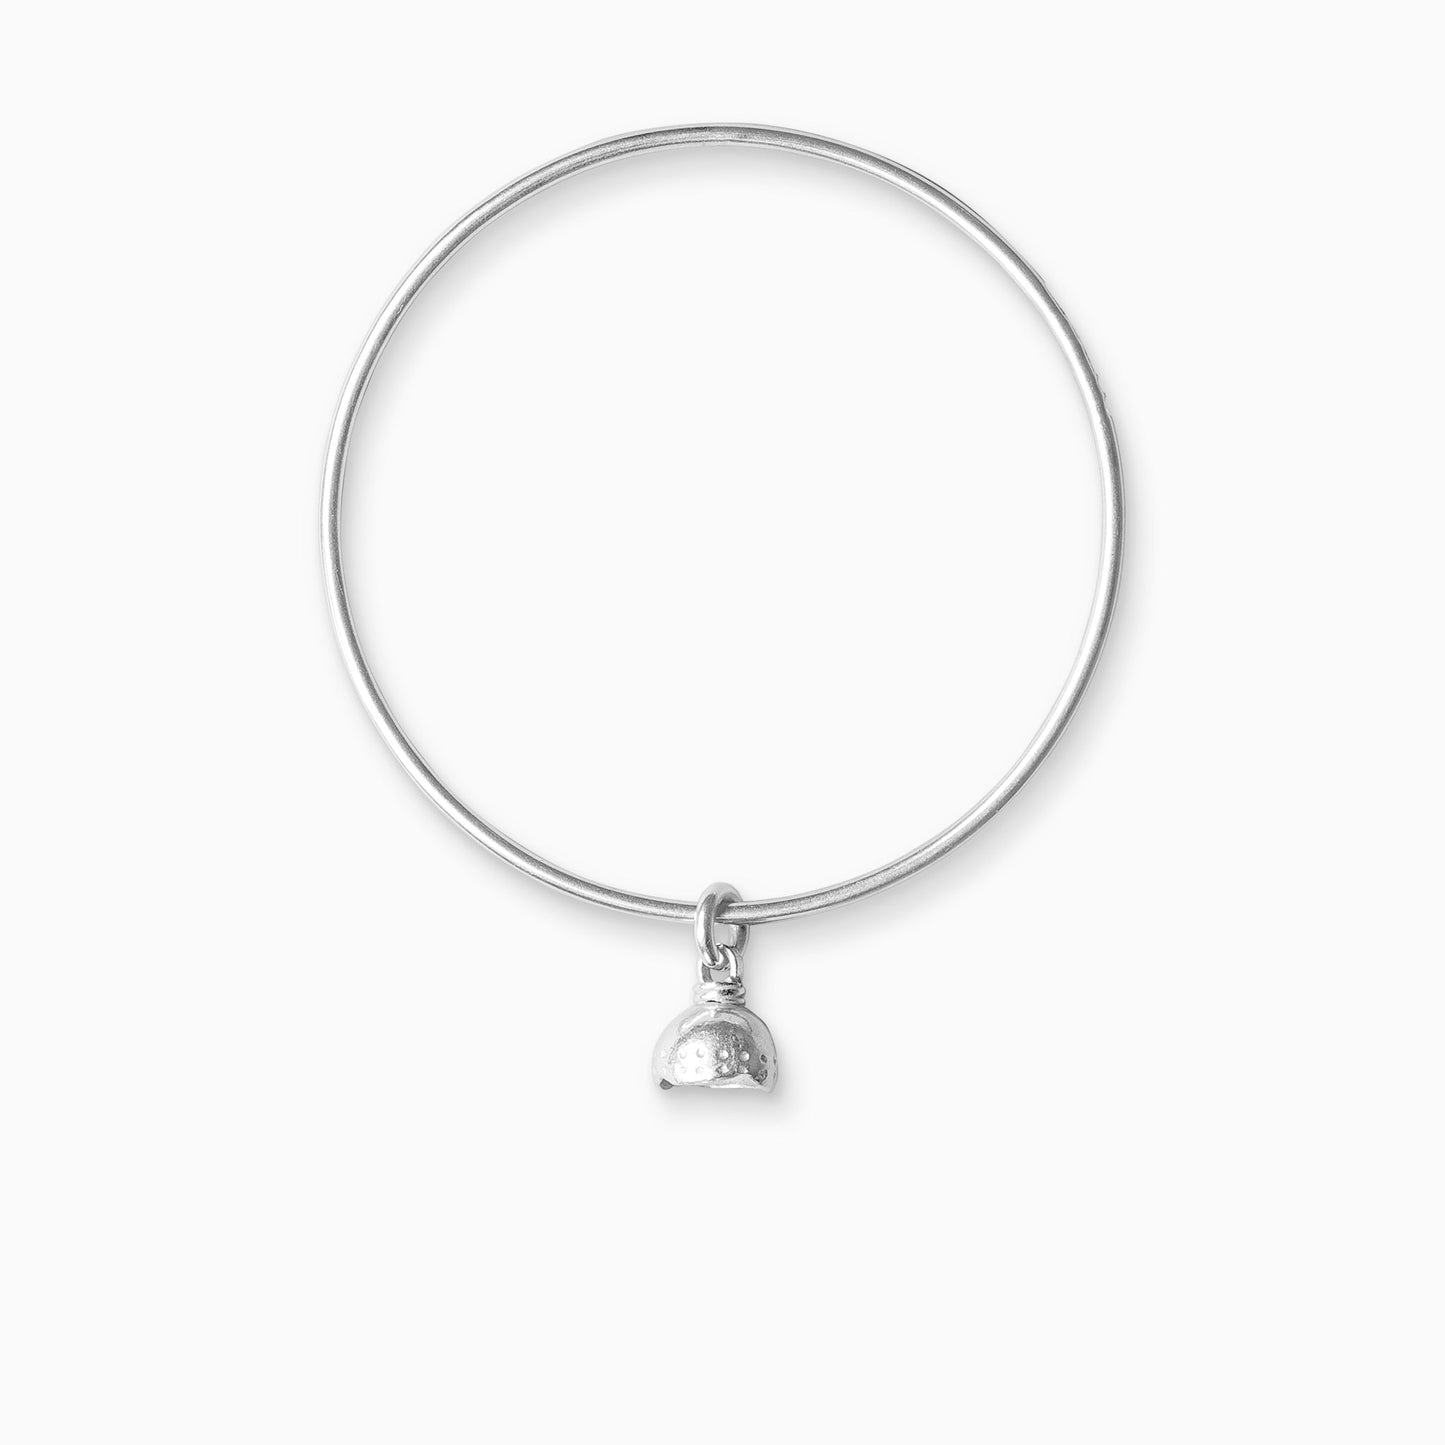 A recycled Silver bell shaped charm freely moving on a round wire bangle. Charm 11mm. Bangle 63mm inside diameter x 2mm round wire.